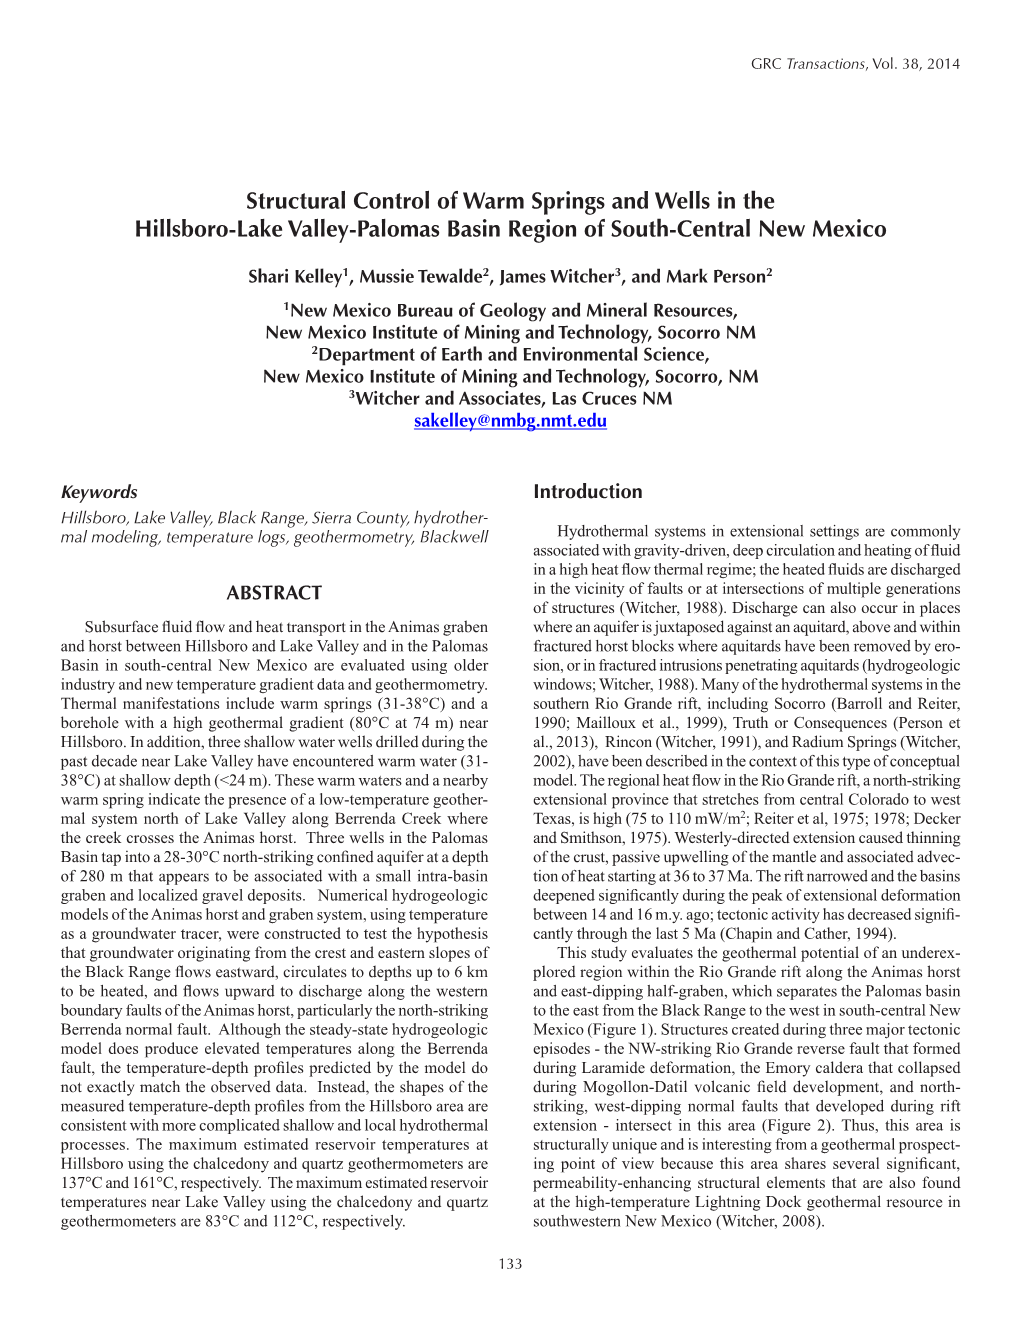 Structural Control of Warm Springs and Wells in the Hillsboro-Lake Valley-Palomas Basin Region of South-Central New Mexico